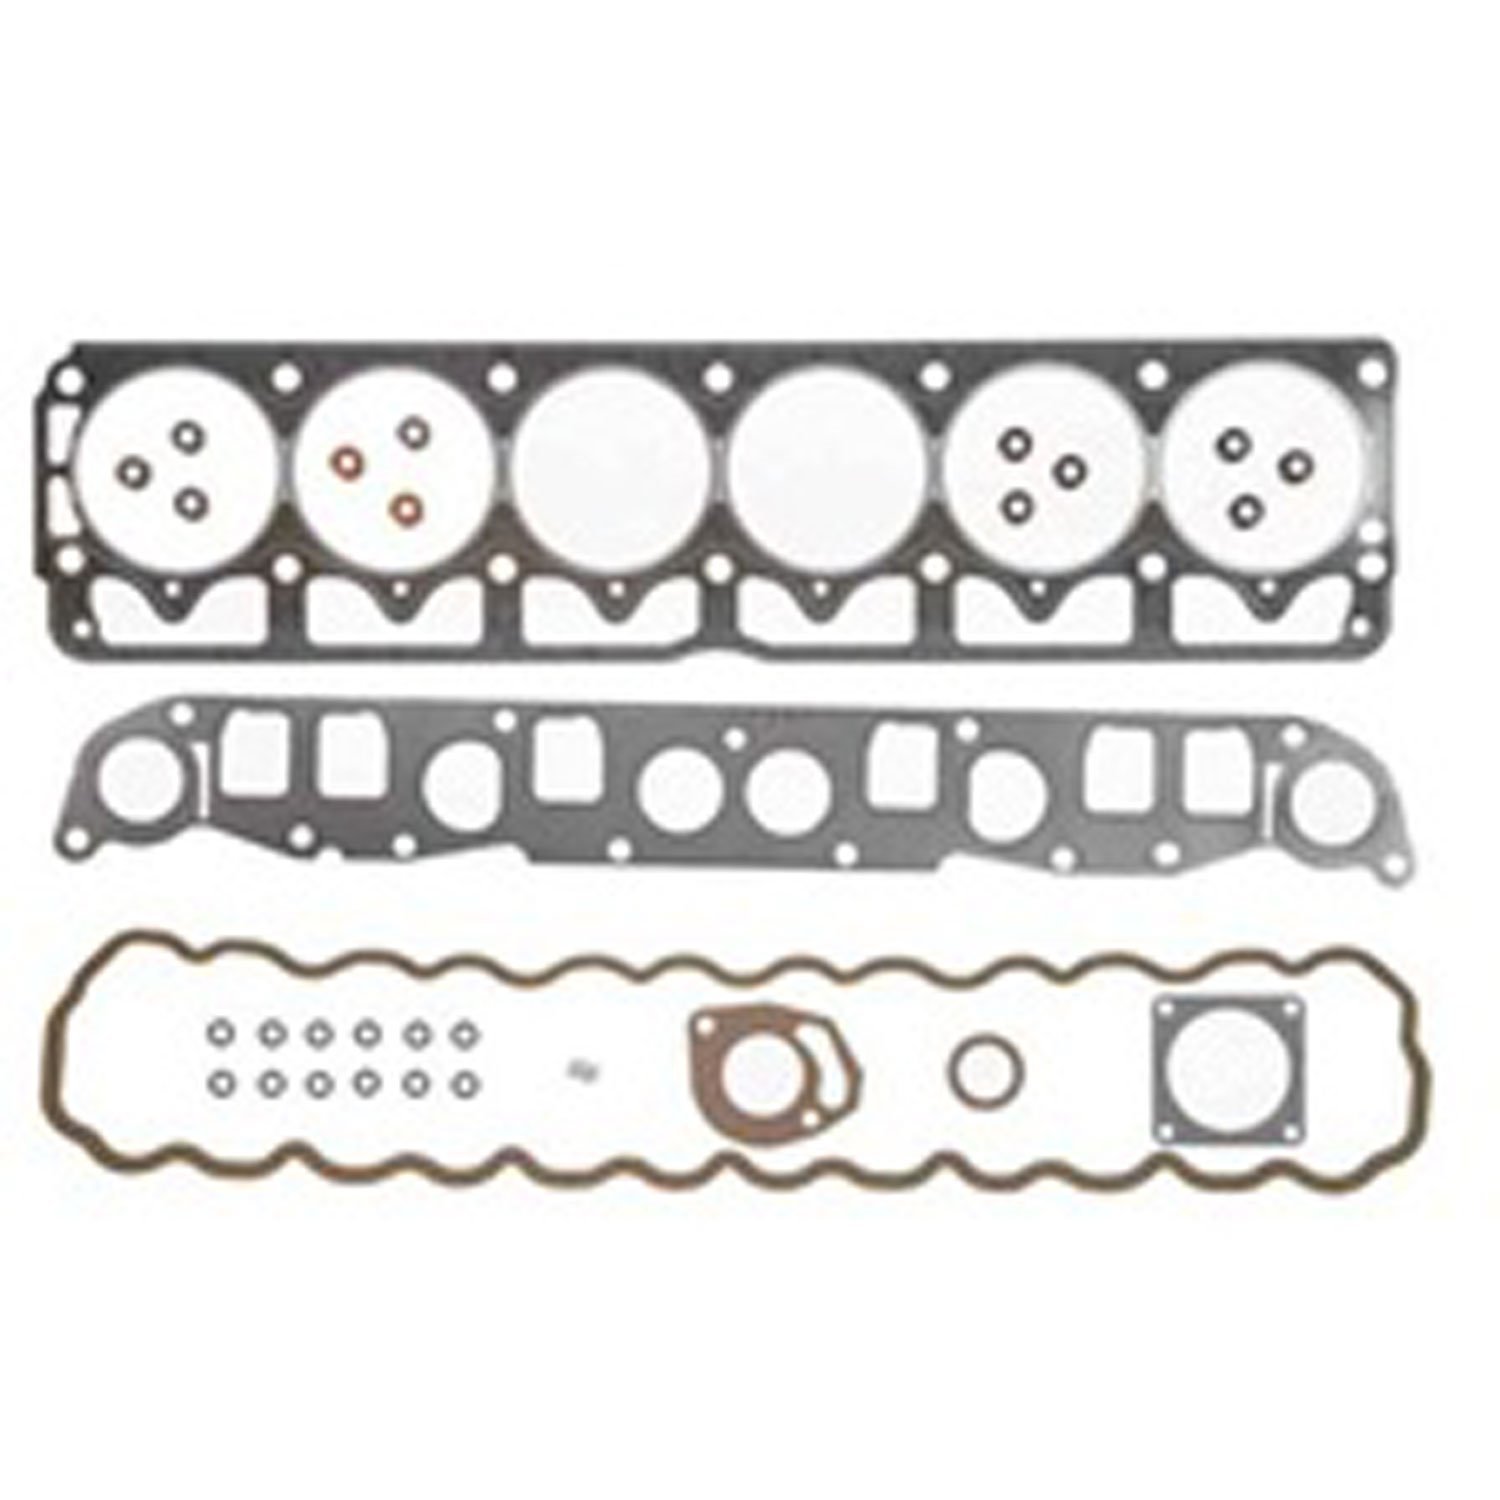 This upper engine gasket set from Omix-ADA fits the 4.0L engine in 91-98 Jeep Cherokees 93-98 Grand